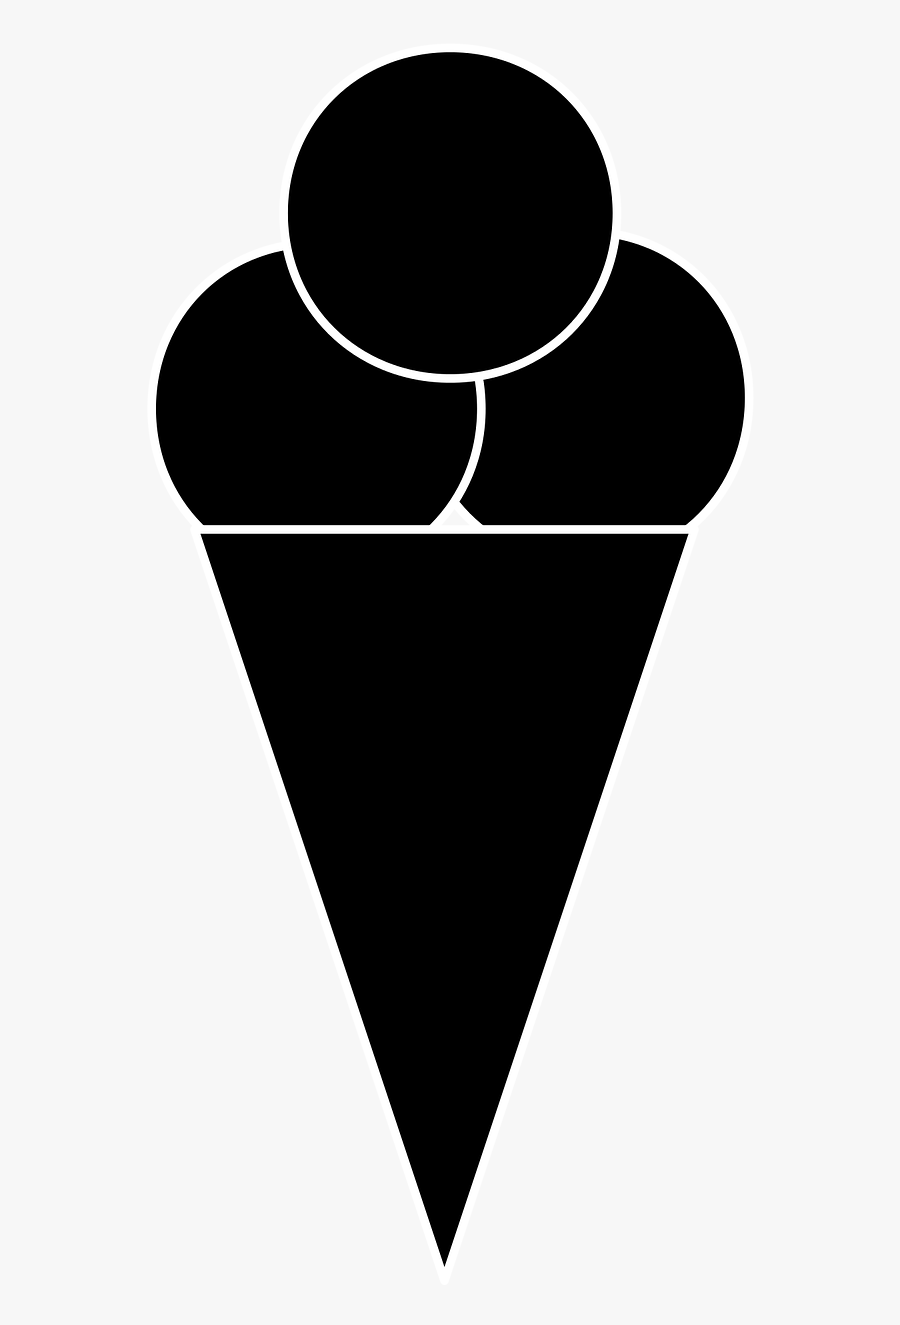 Ice Symbol Ice Cream Symbol Free Picture - Target With Bullet Holes, Transparent Clipart